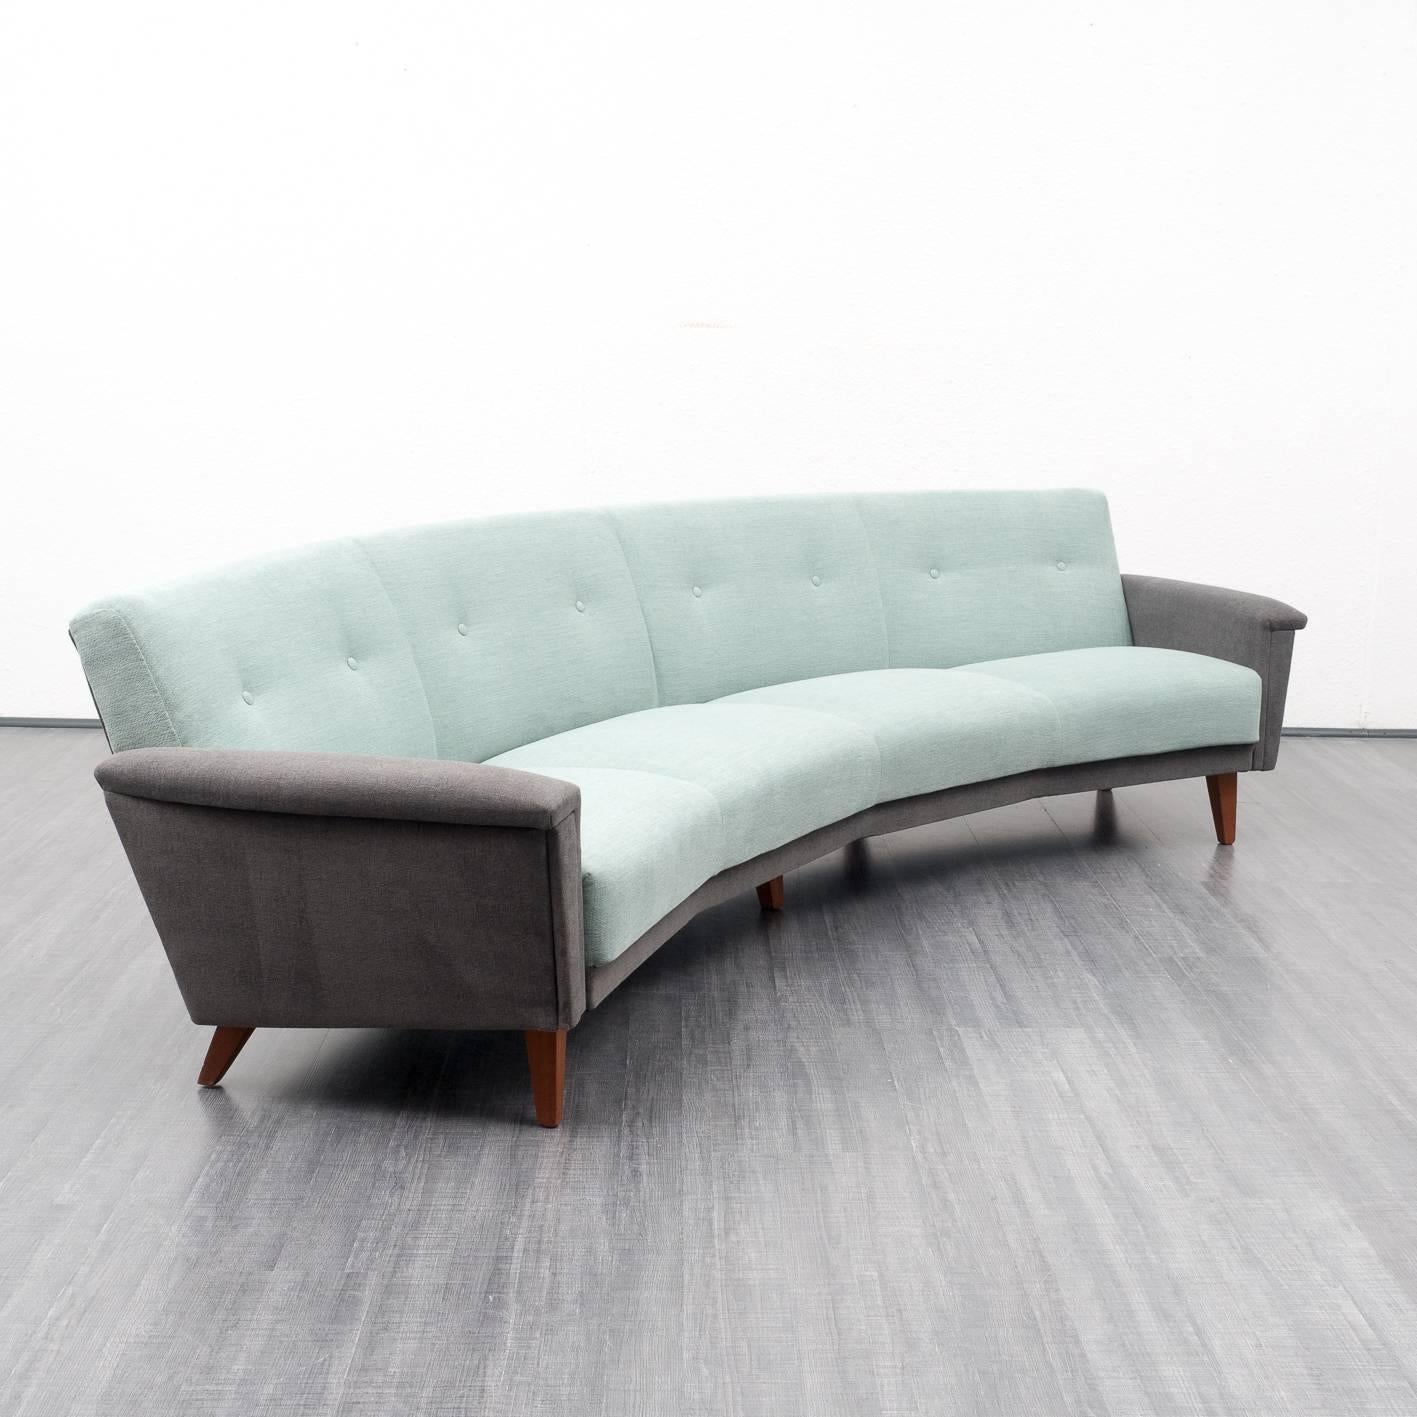 Mid-Century Modern Semi-Circular 1950s Xl Sofa, Professionally Reupholstered For Sale